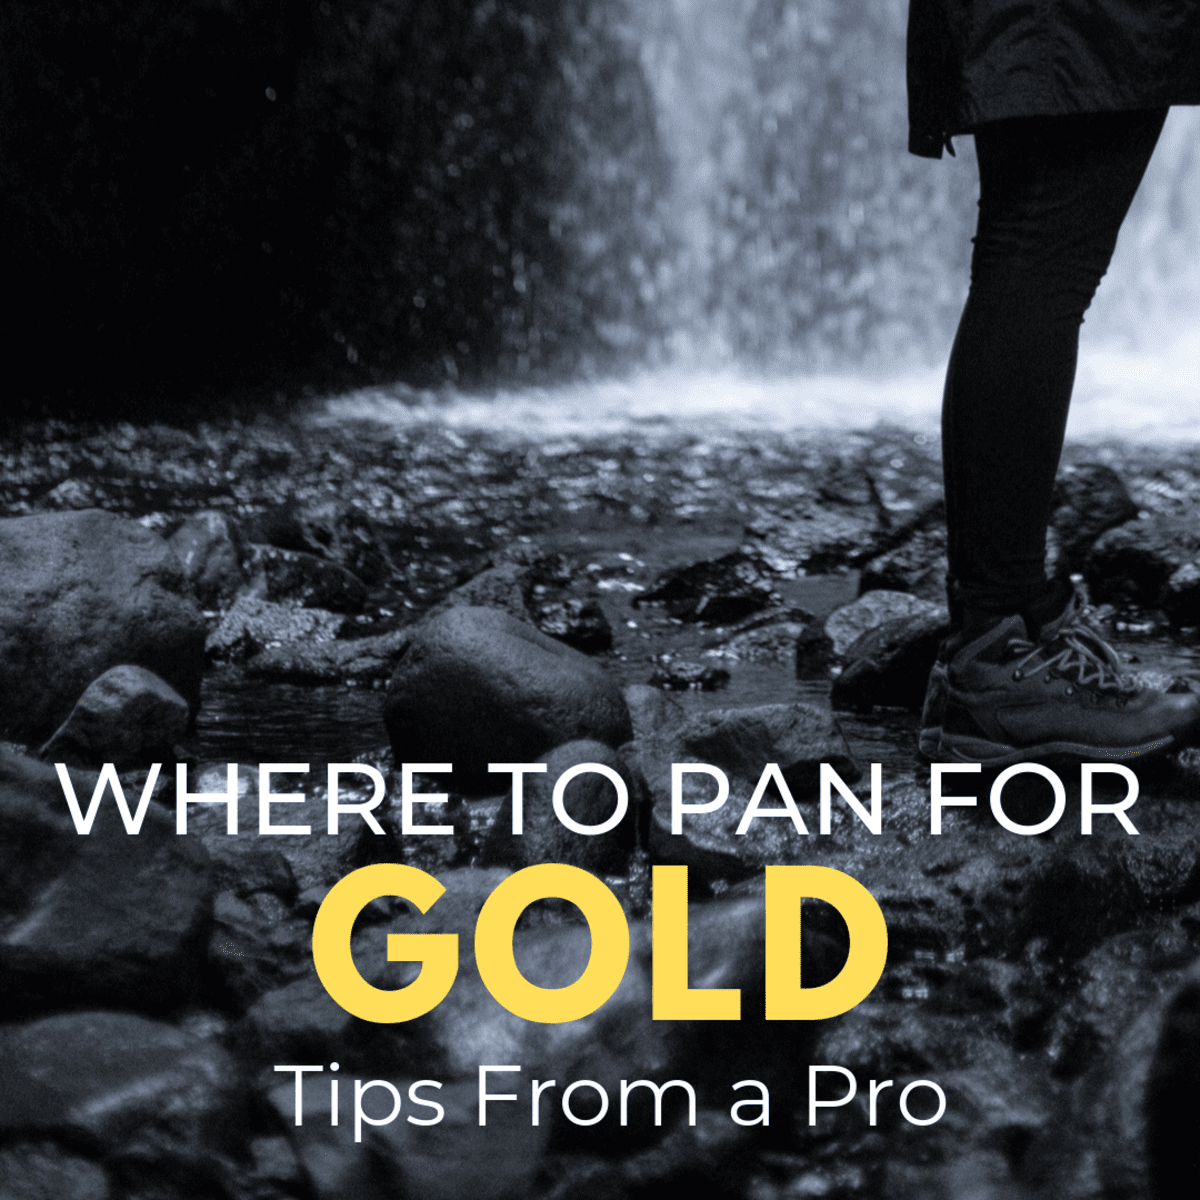 If You Pan For Gold, Do You Actually Get To Keep It?